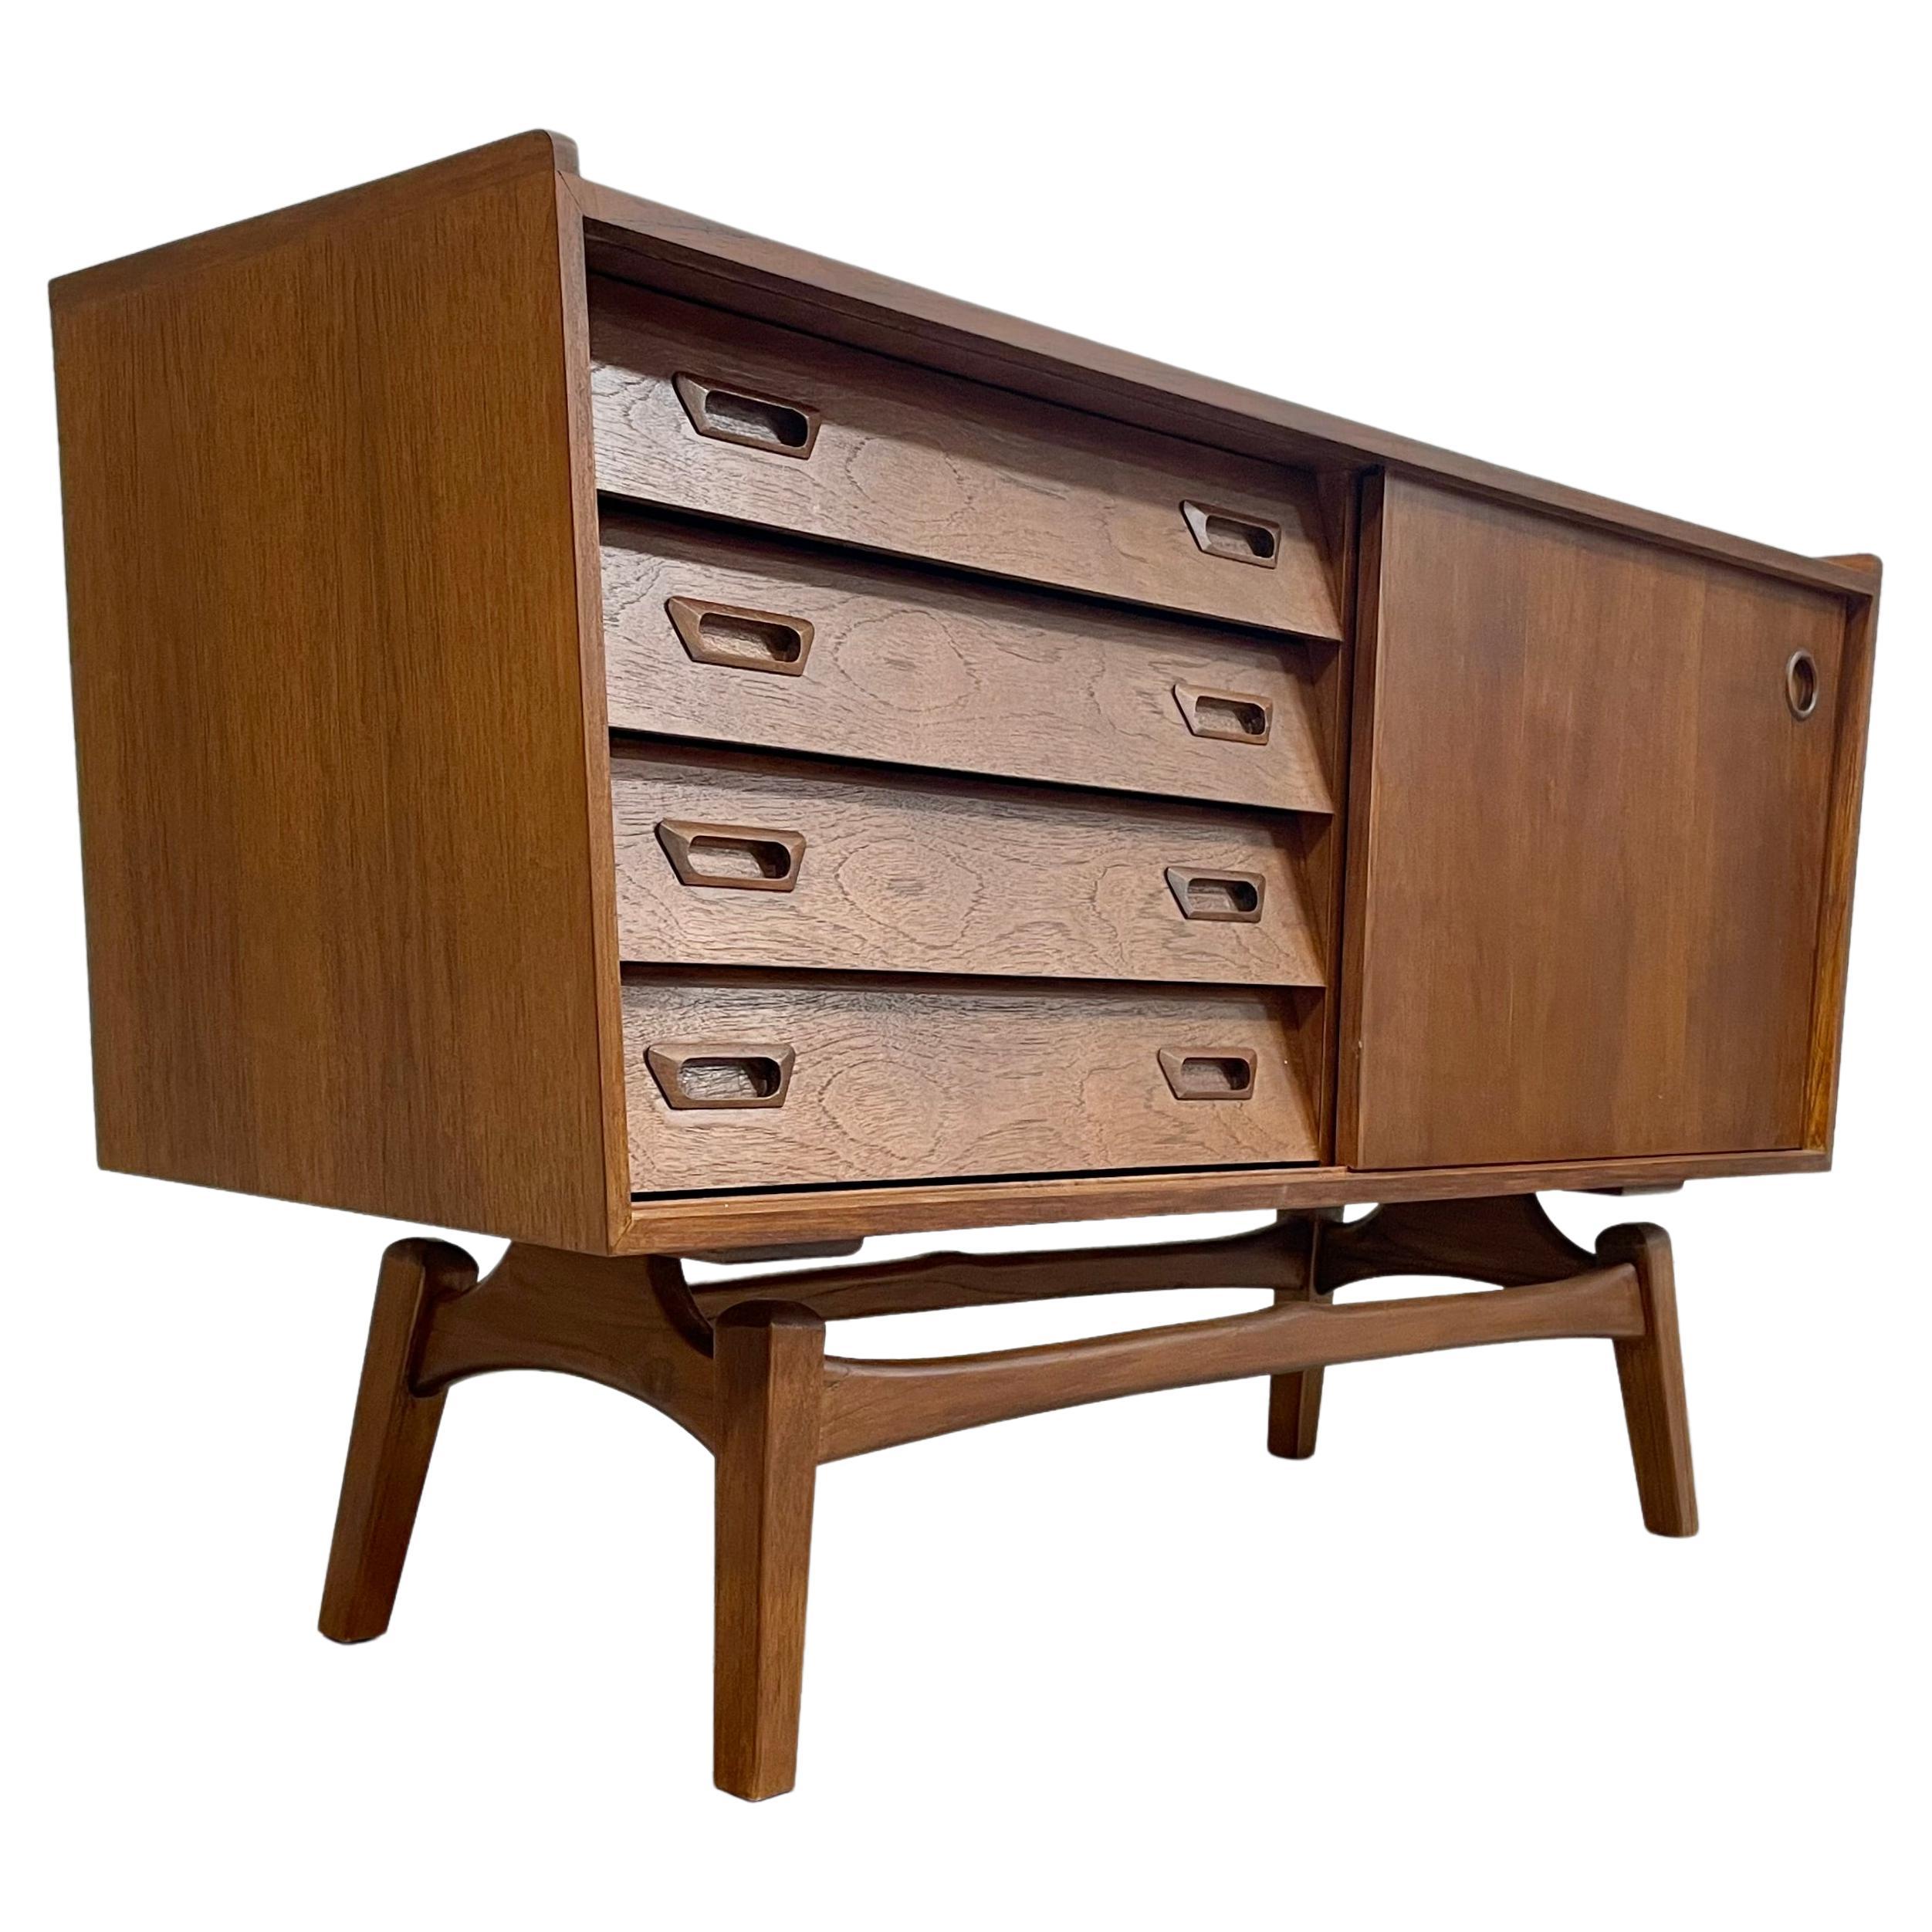 Apartment Sized Mid-Century Modern Styled Floating Teak Credenza / Sideboard In New Condition For Sale In Weehawken, NJ